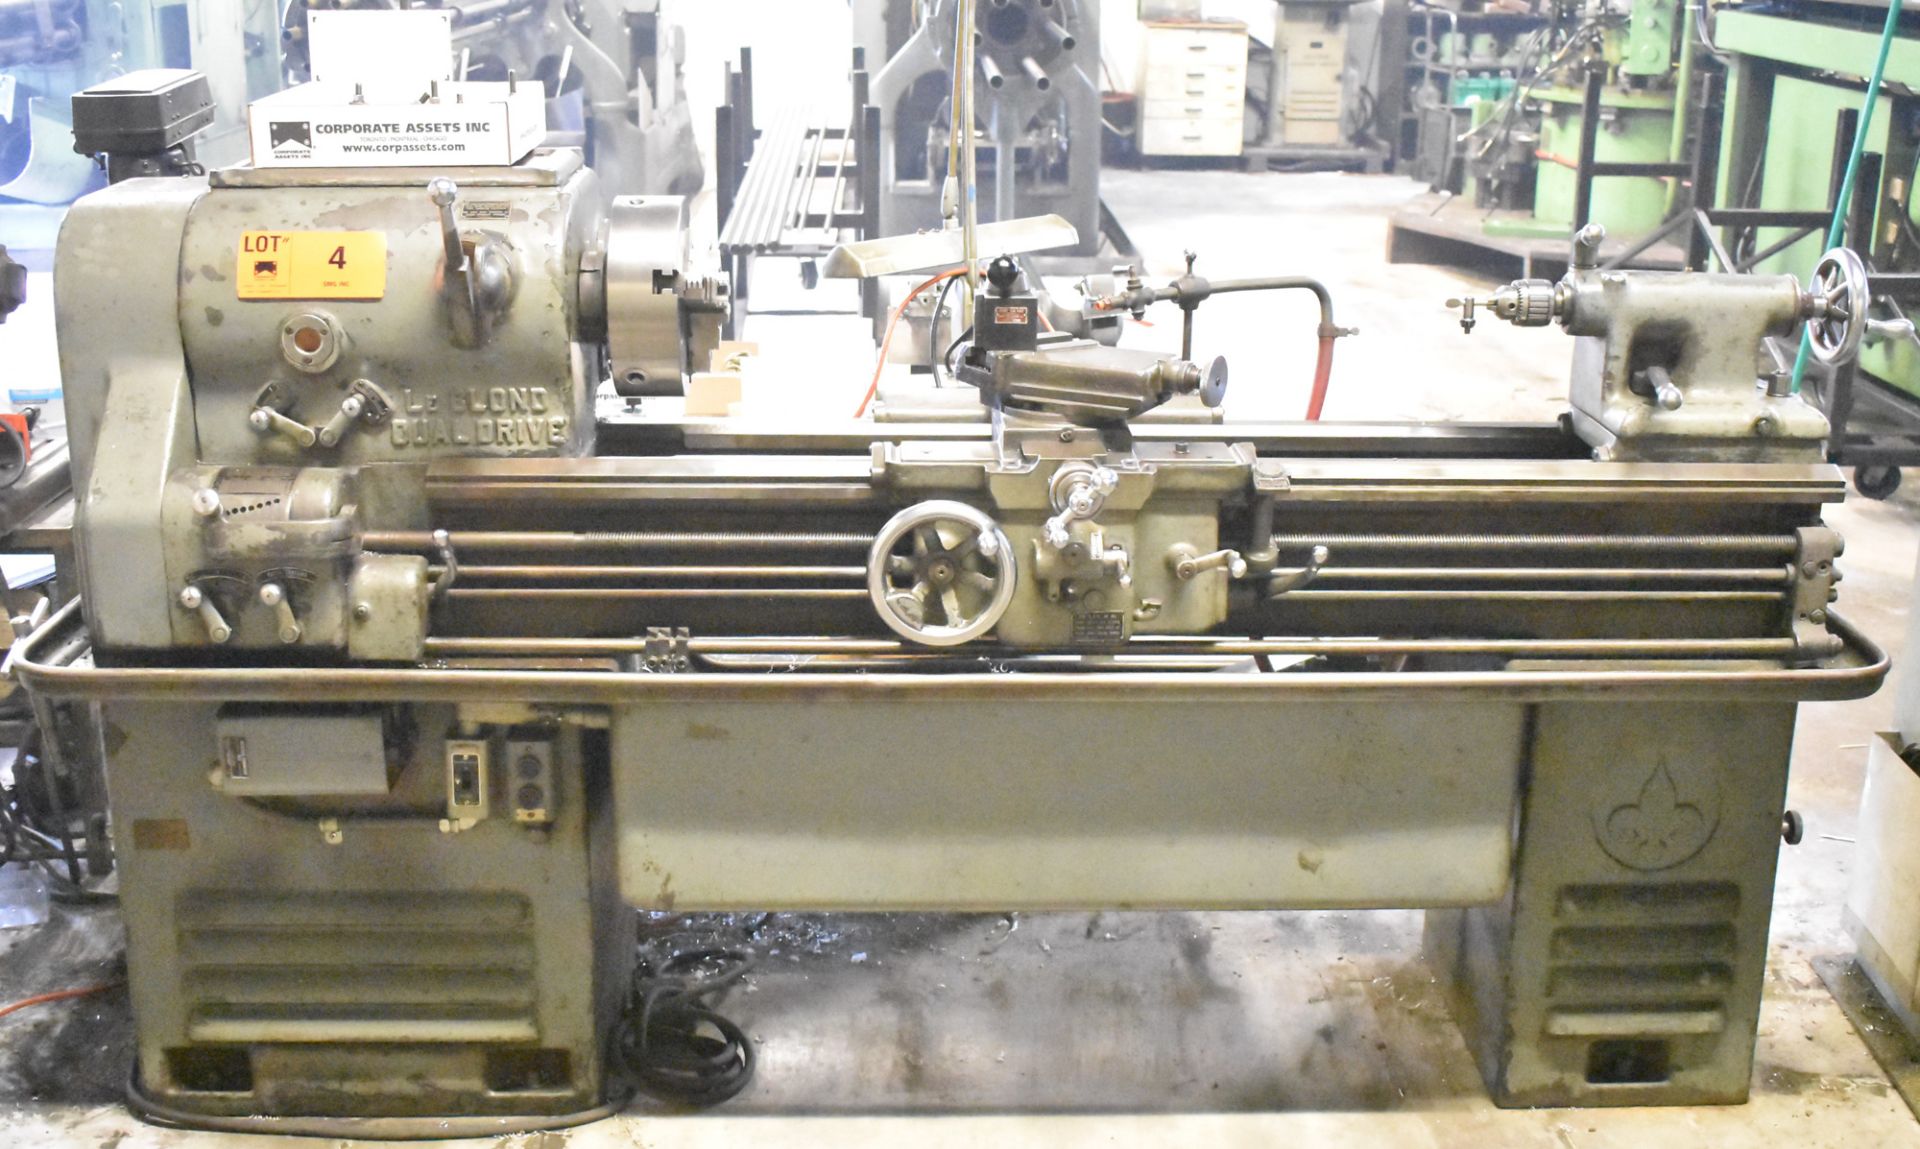 LEBLOND DUAL DRIVE TOOL ROOM ENGINE LATHE WITH 15" SWING, 45" BETWEEN CENTERS, SPEEDS TO 1800 RPM,